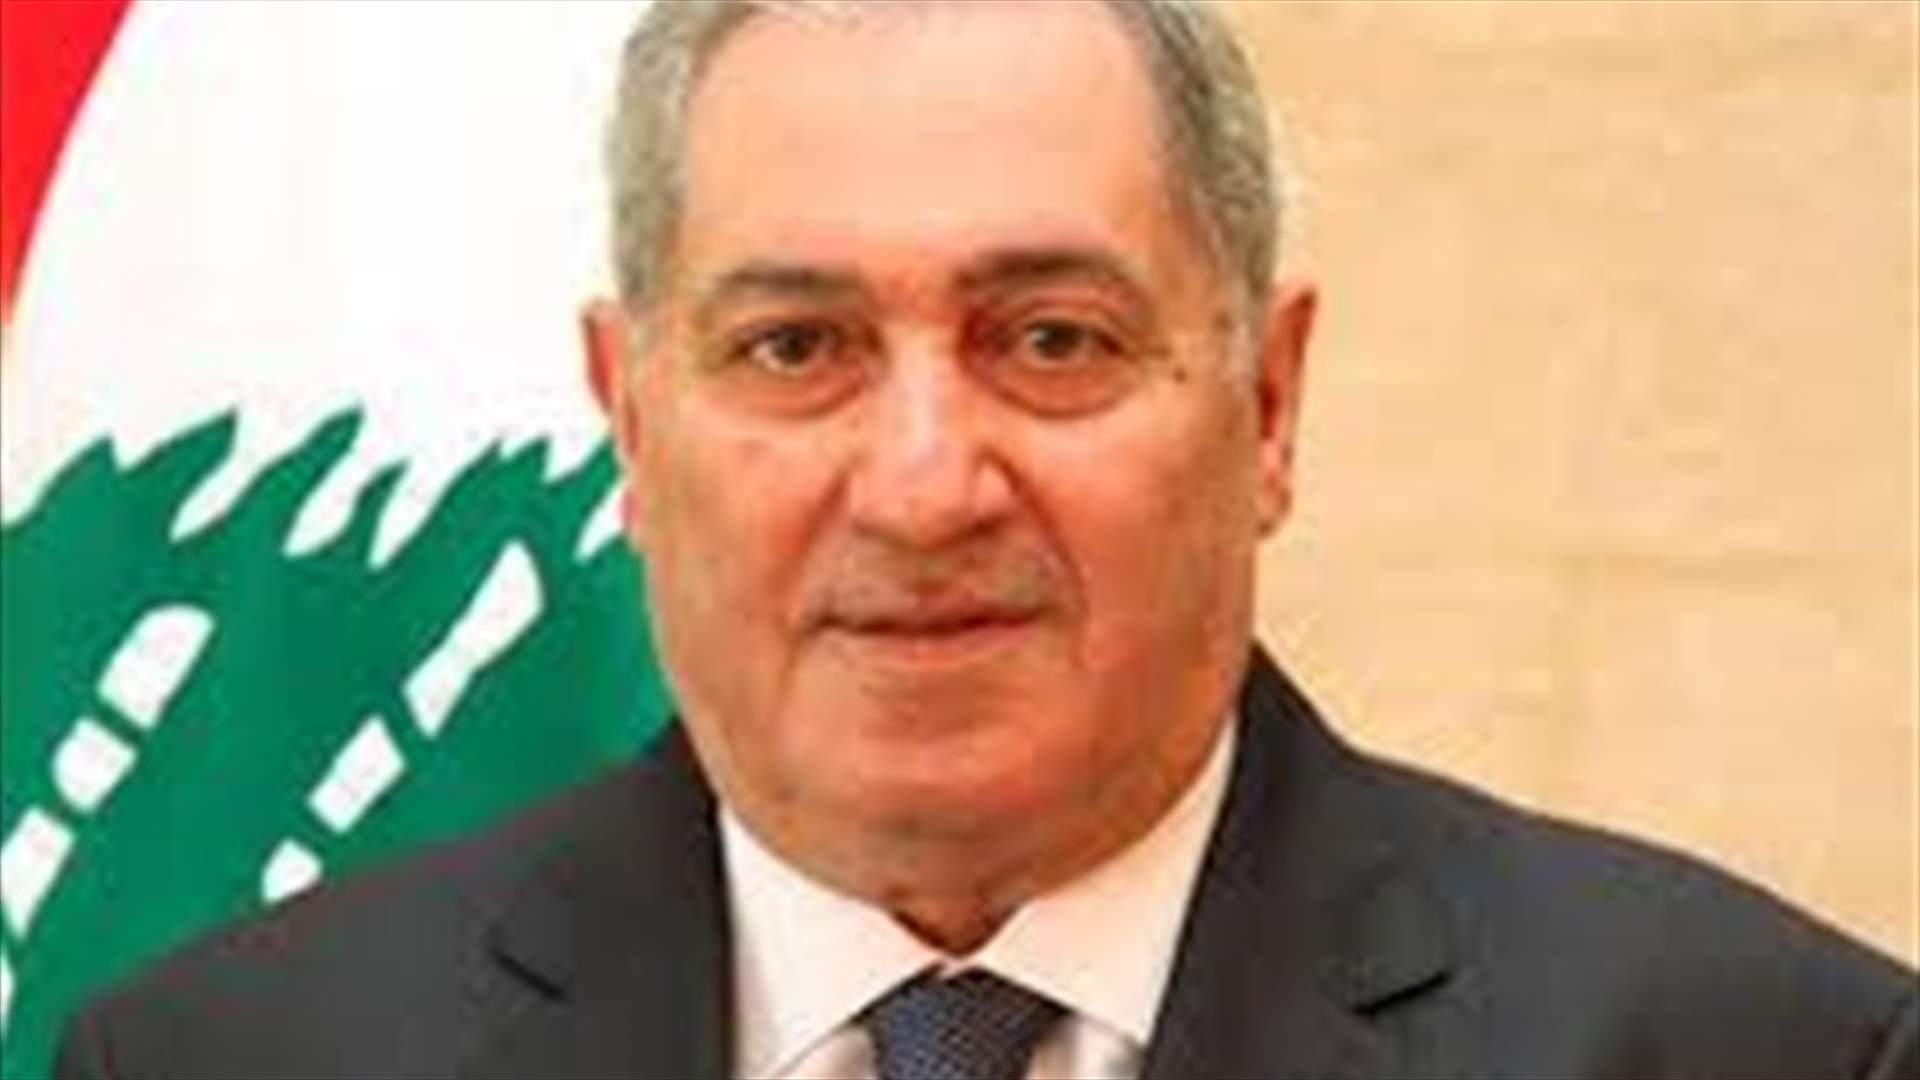 MP Ahmad Karame says will not vote for Aoun 